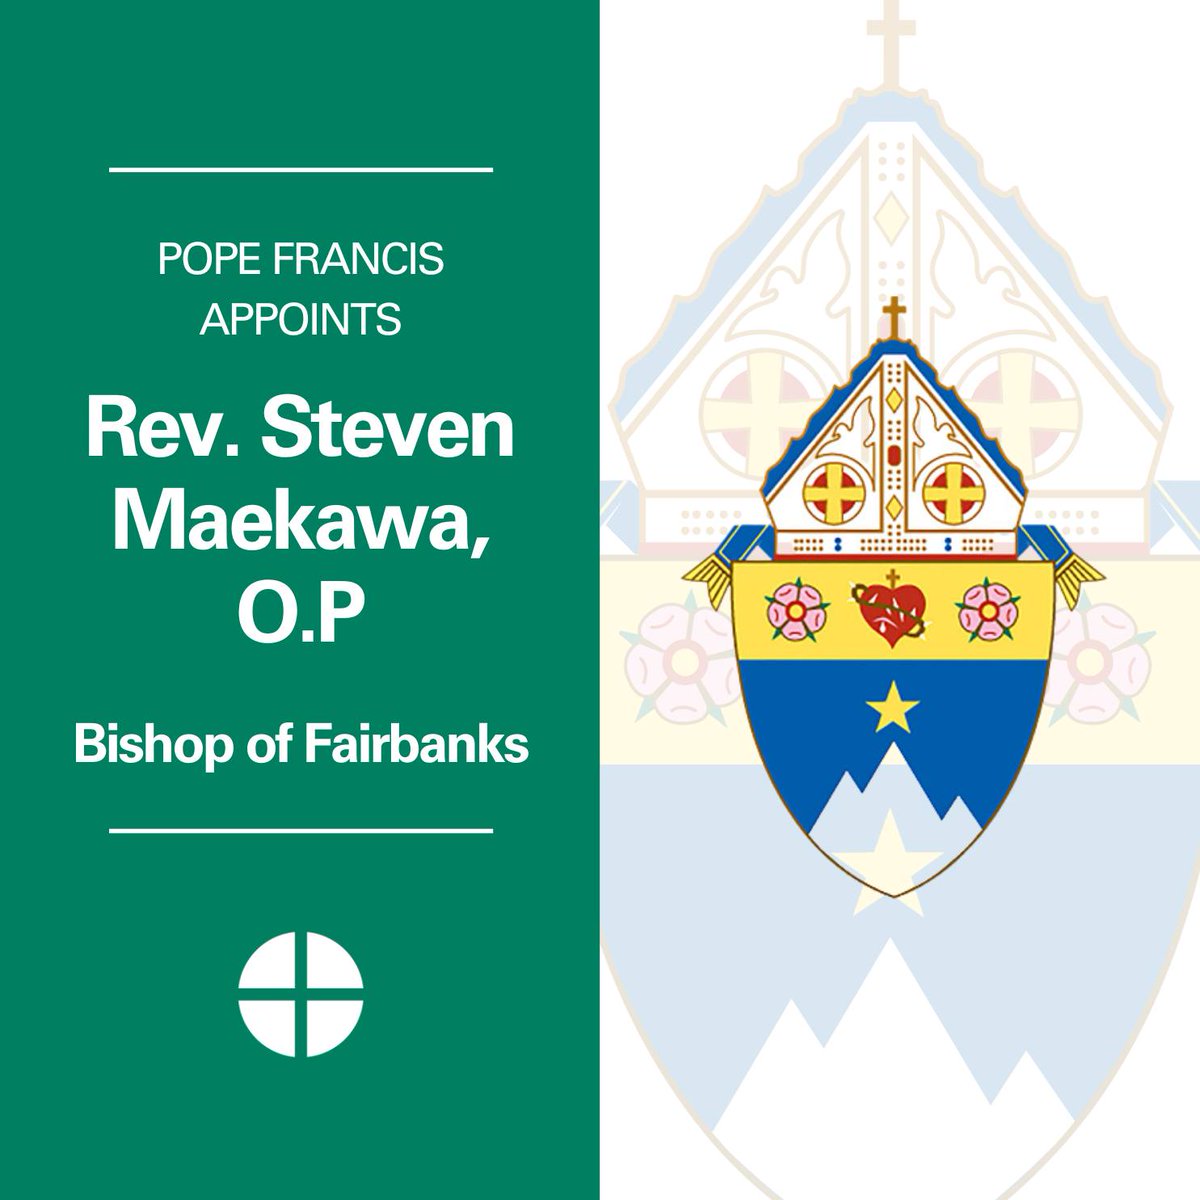 Bishop Michael C. Barber, SJ congratulates Bishop-elect Steven Maekawa, O.P.: “All of us in the Diocese of Oakland promise him our prayers and support.” oakdiocese.org/news/bishop-ba…